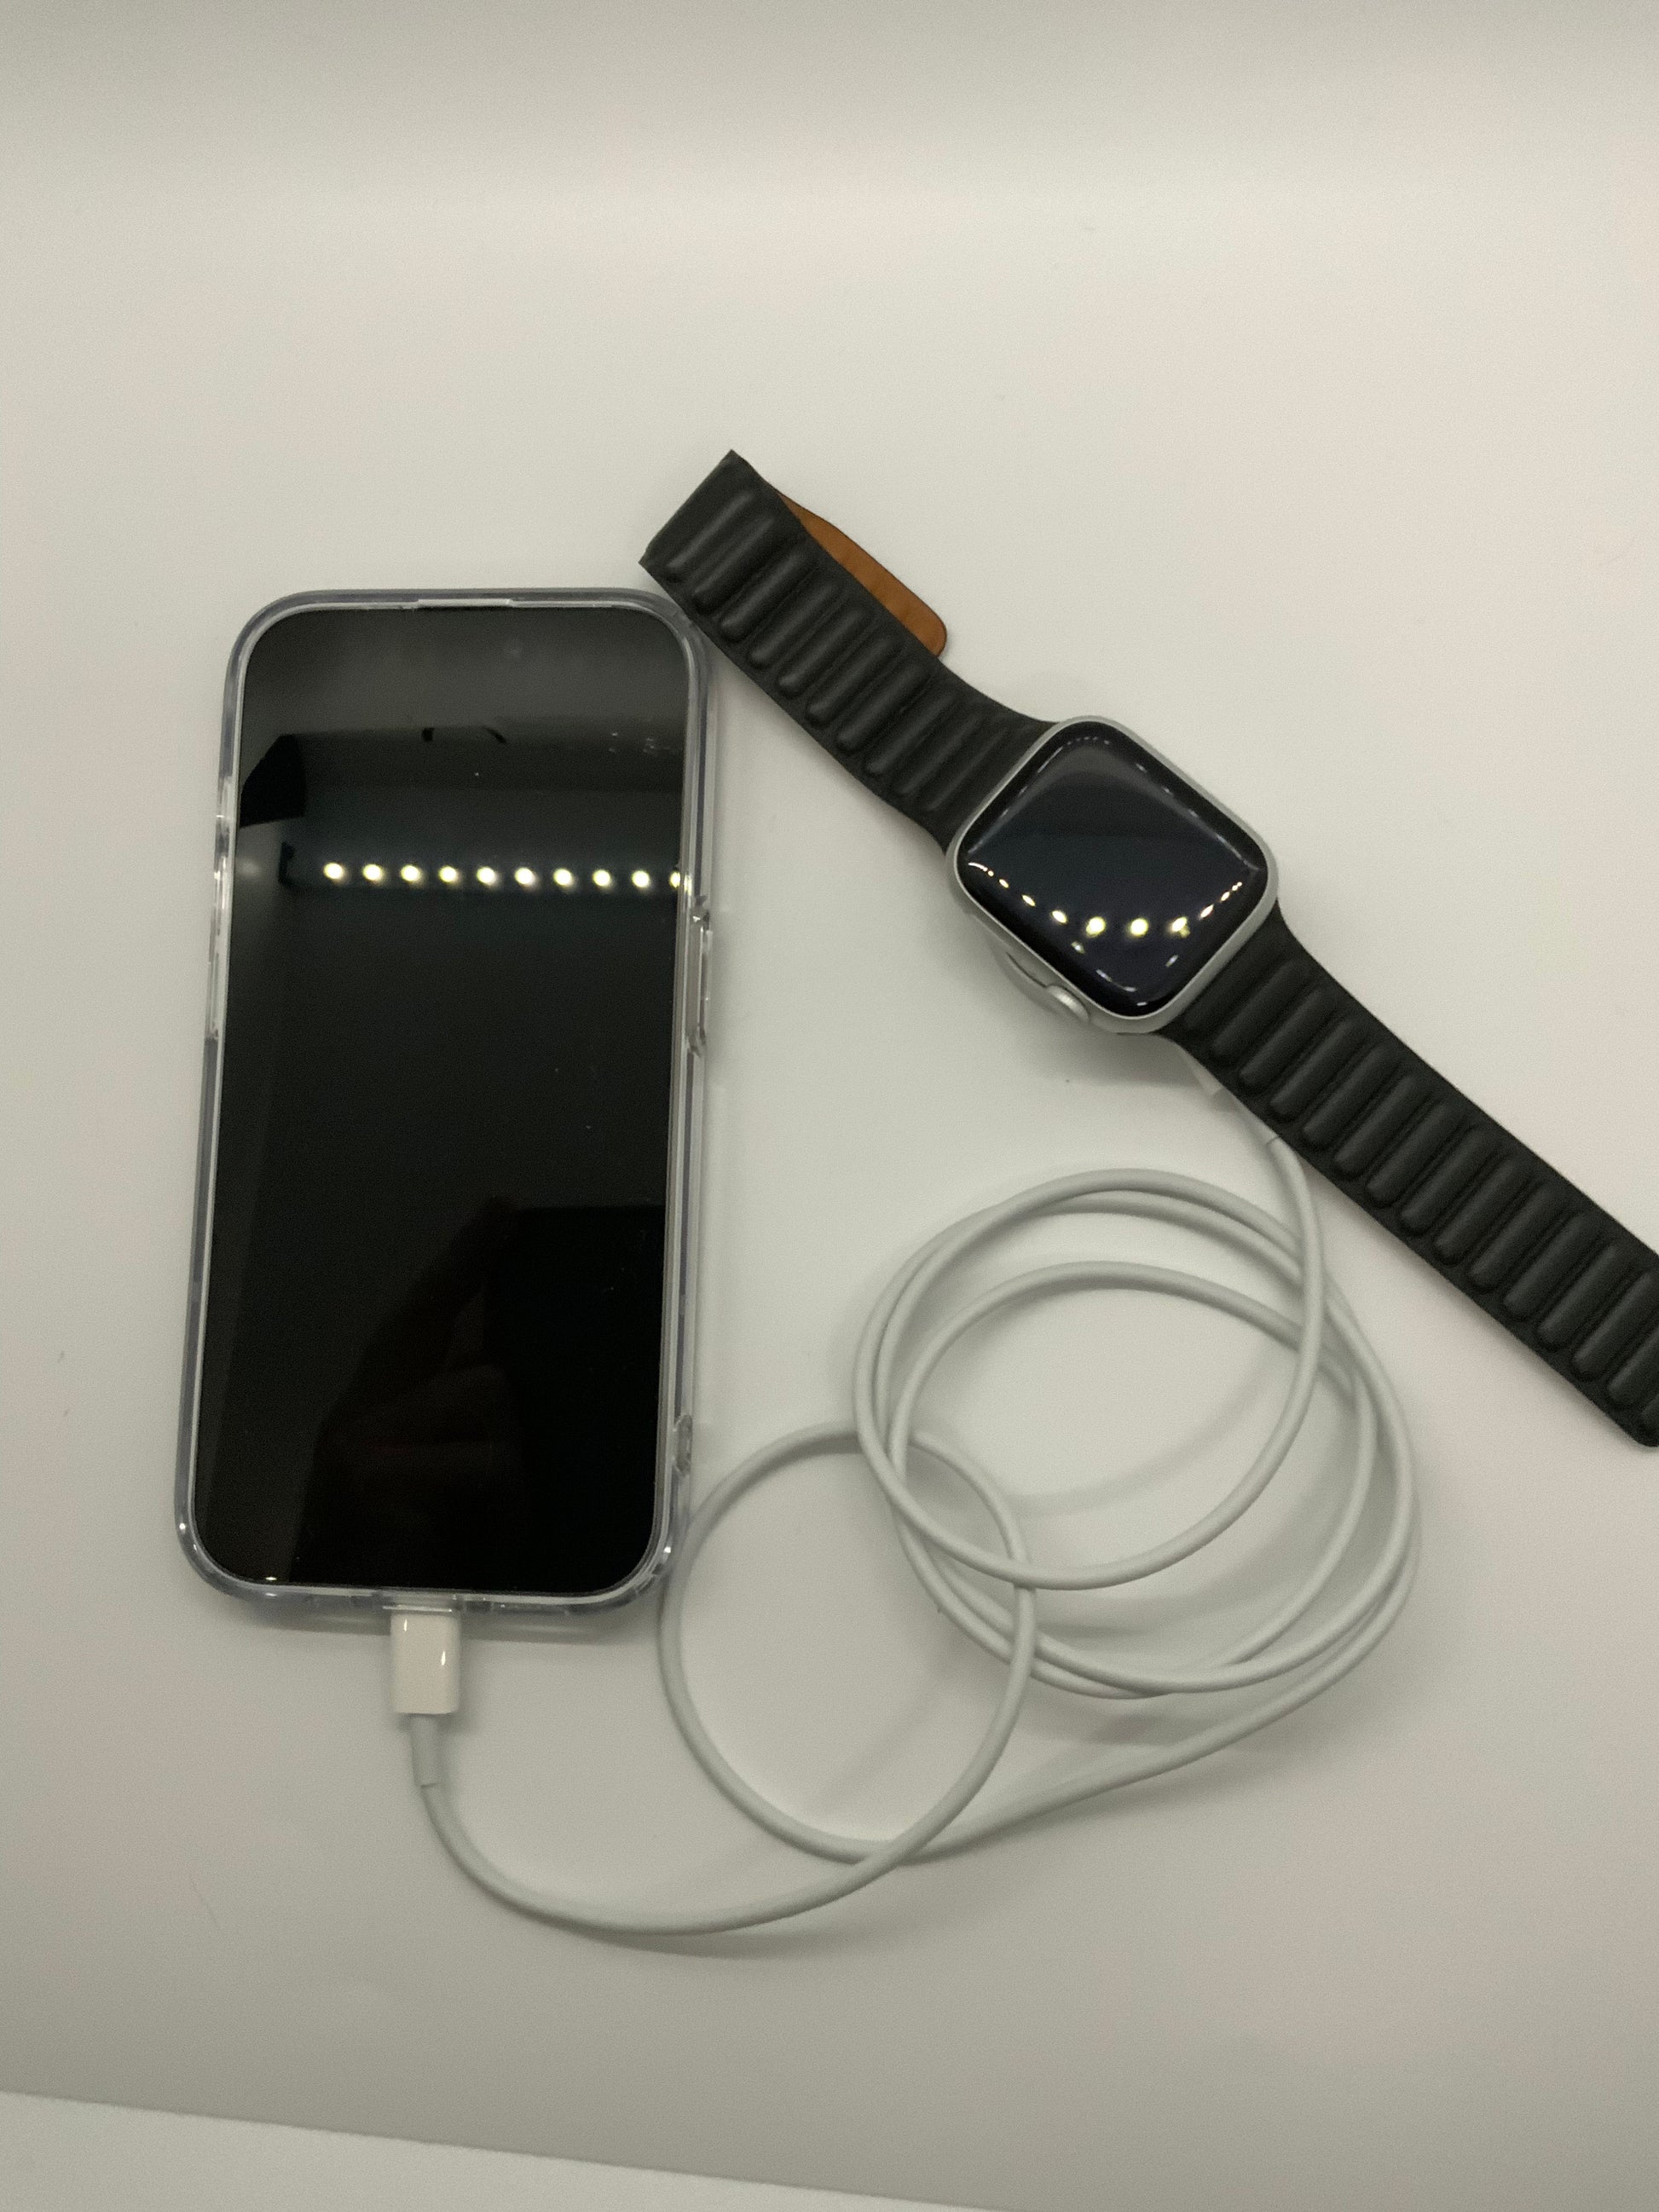 Be My AI: The picture shows a smartphone, a smartwatch, and a charging cable on a white surface. The smartphone is on the left side of the image with its screen facing up. The screen is black and reflects some lights. The charging cable is plugged into the smartphone and is coiled up next to it. The smartwatch is on the right side of the image with its screen facing up as well. The smartwatch has a black strap and its screen is also black, reflecting some lights.